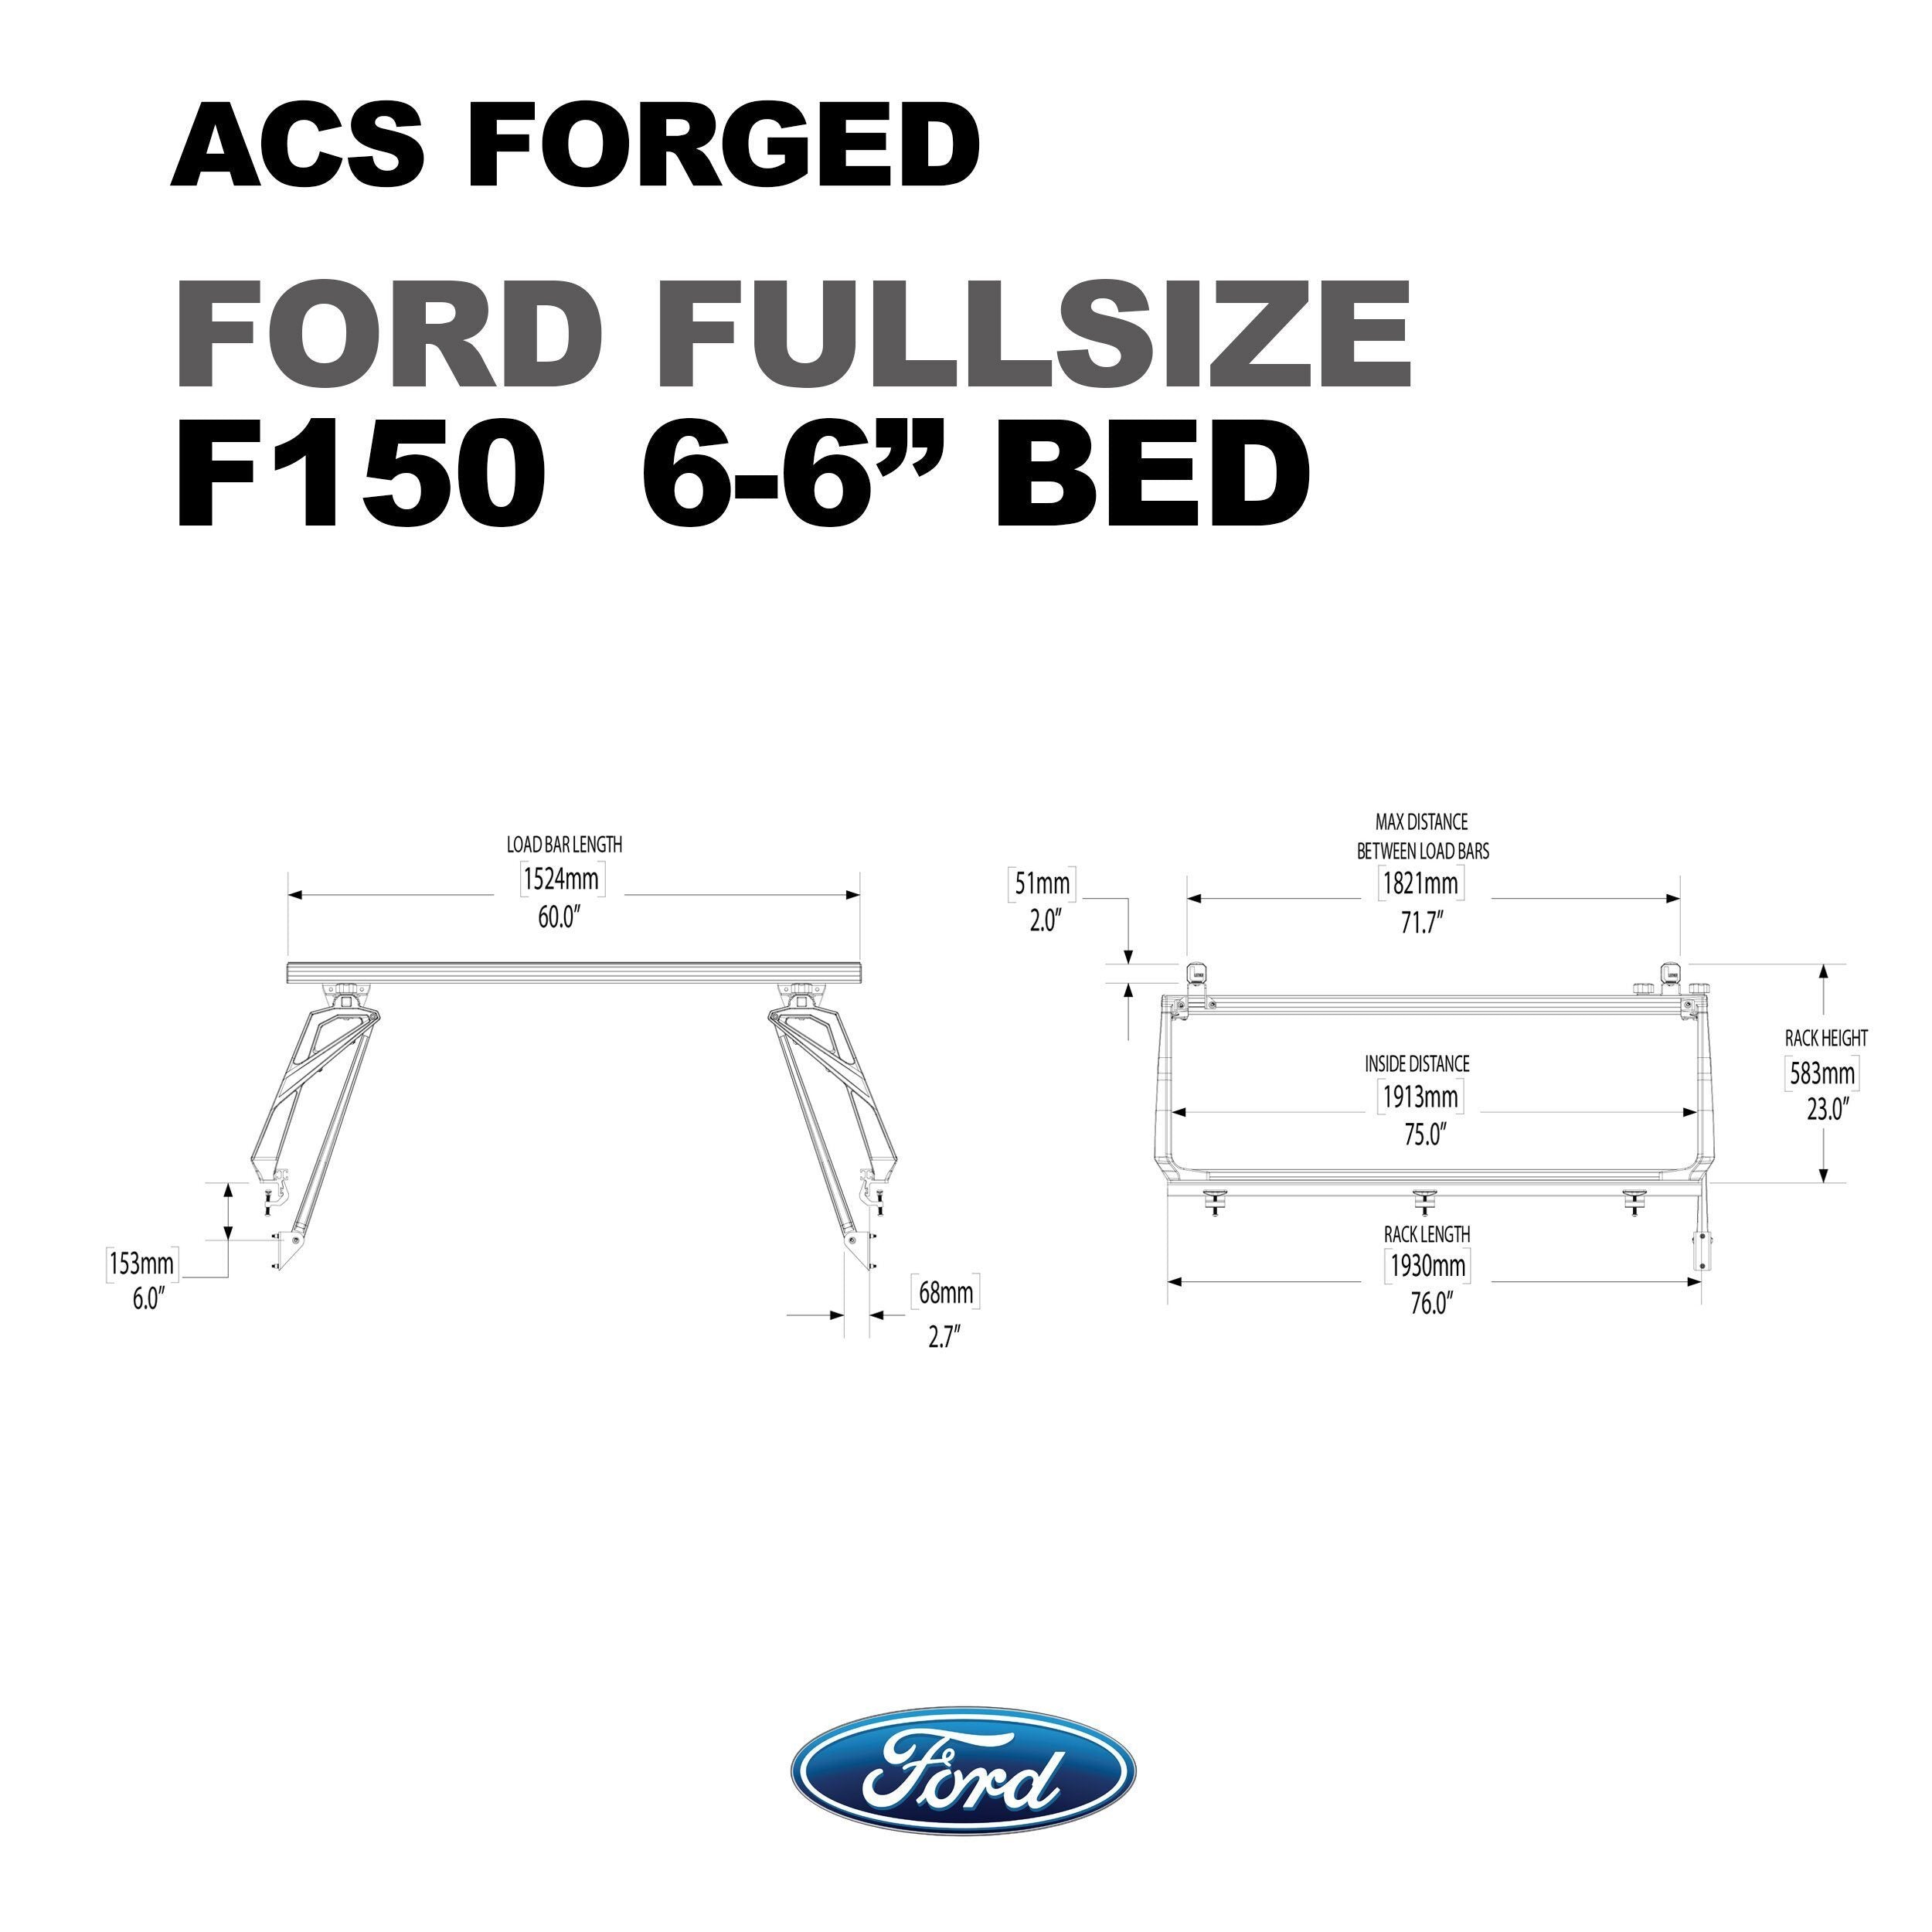 '04-23 Ford F150-ACS Forged Bed Accessories Leitner Designs design